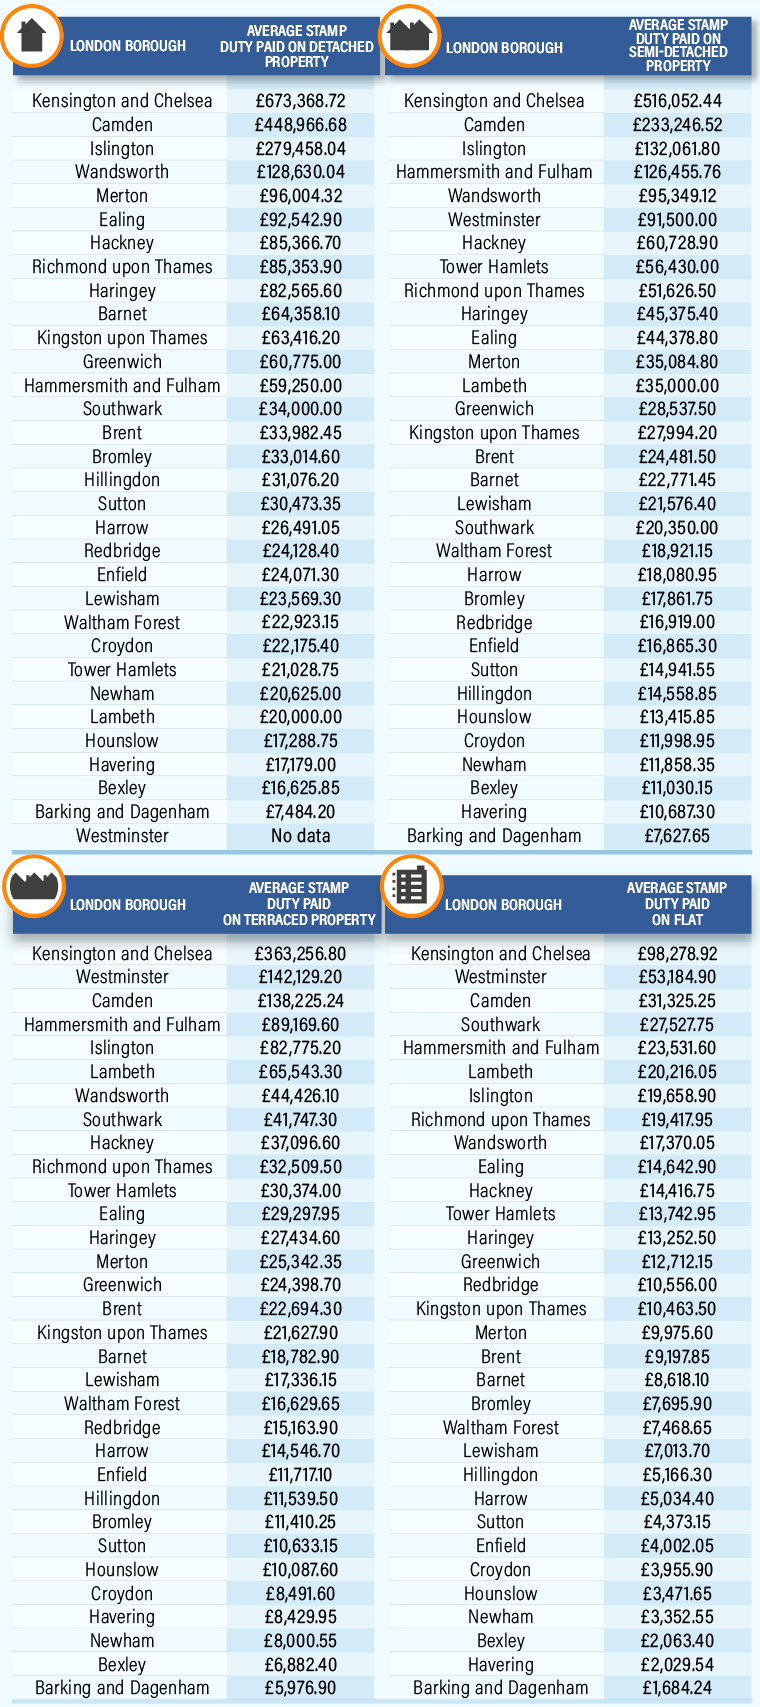 london-stamp-duty-land-tax-infographic